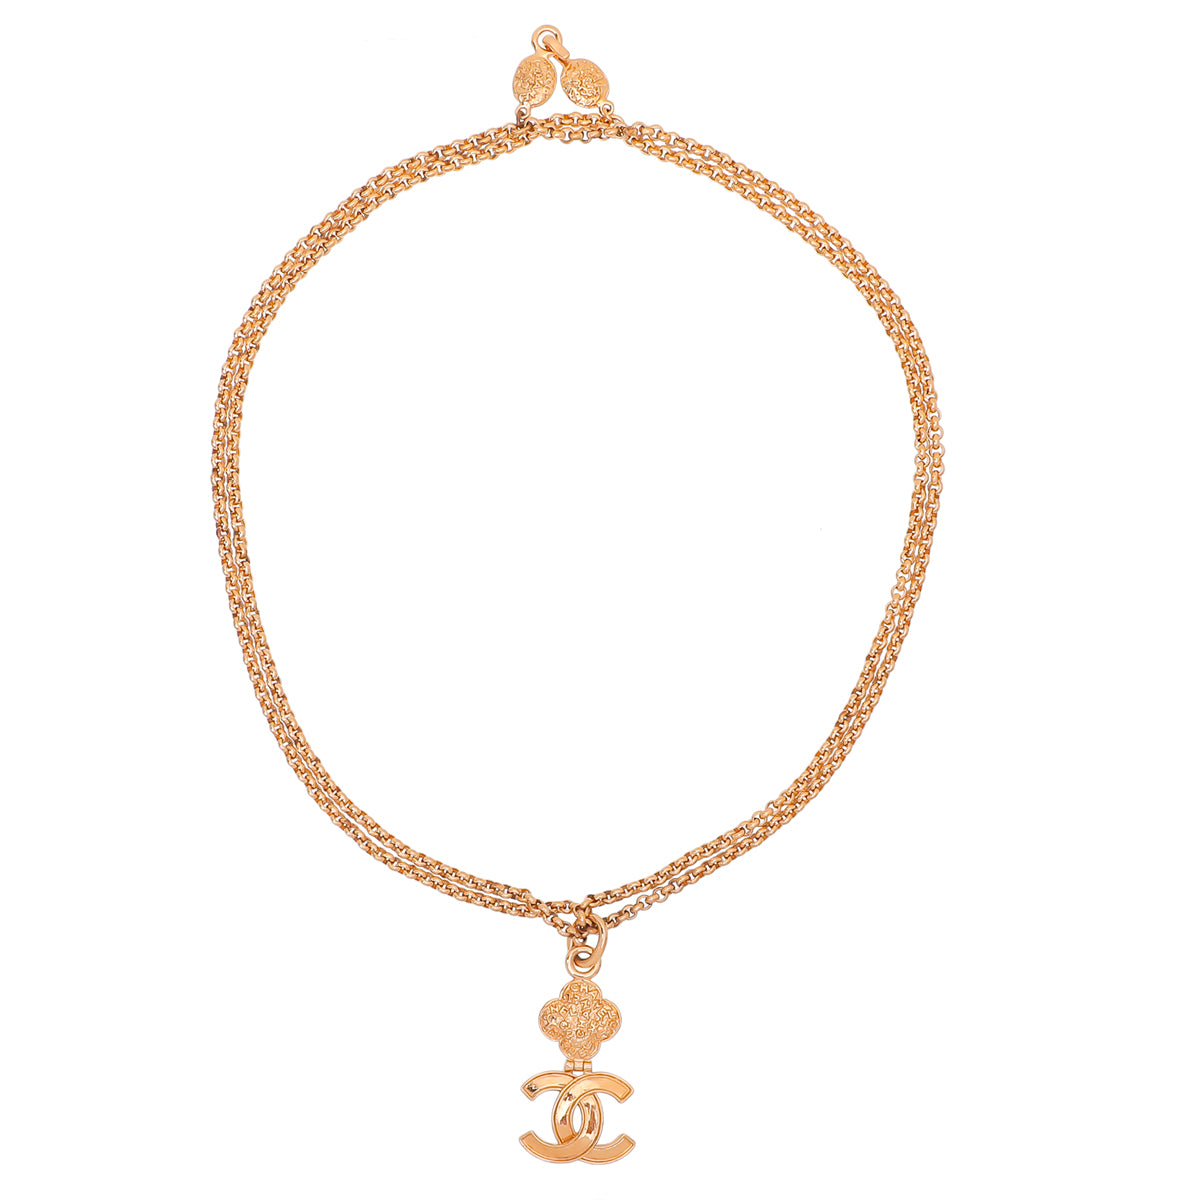 Chanel Clover Yellow Gold Necklace | Clover jewelry, Antique necklace,  Yellow gold necklaces